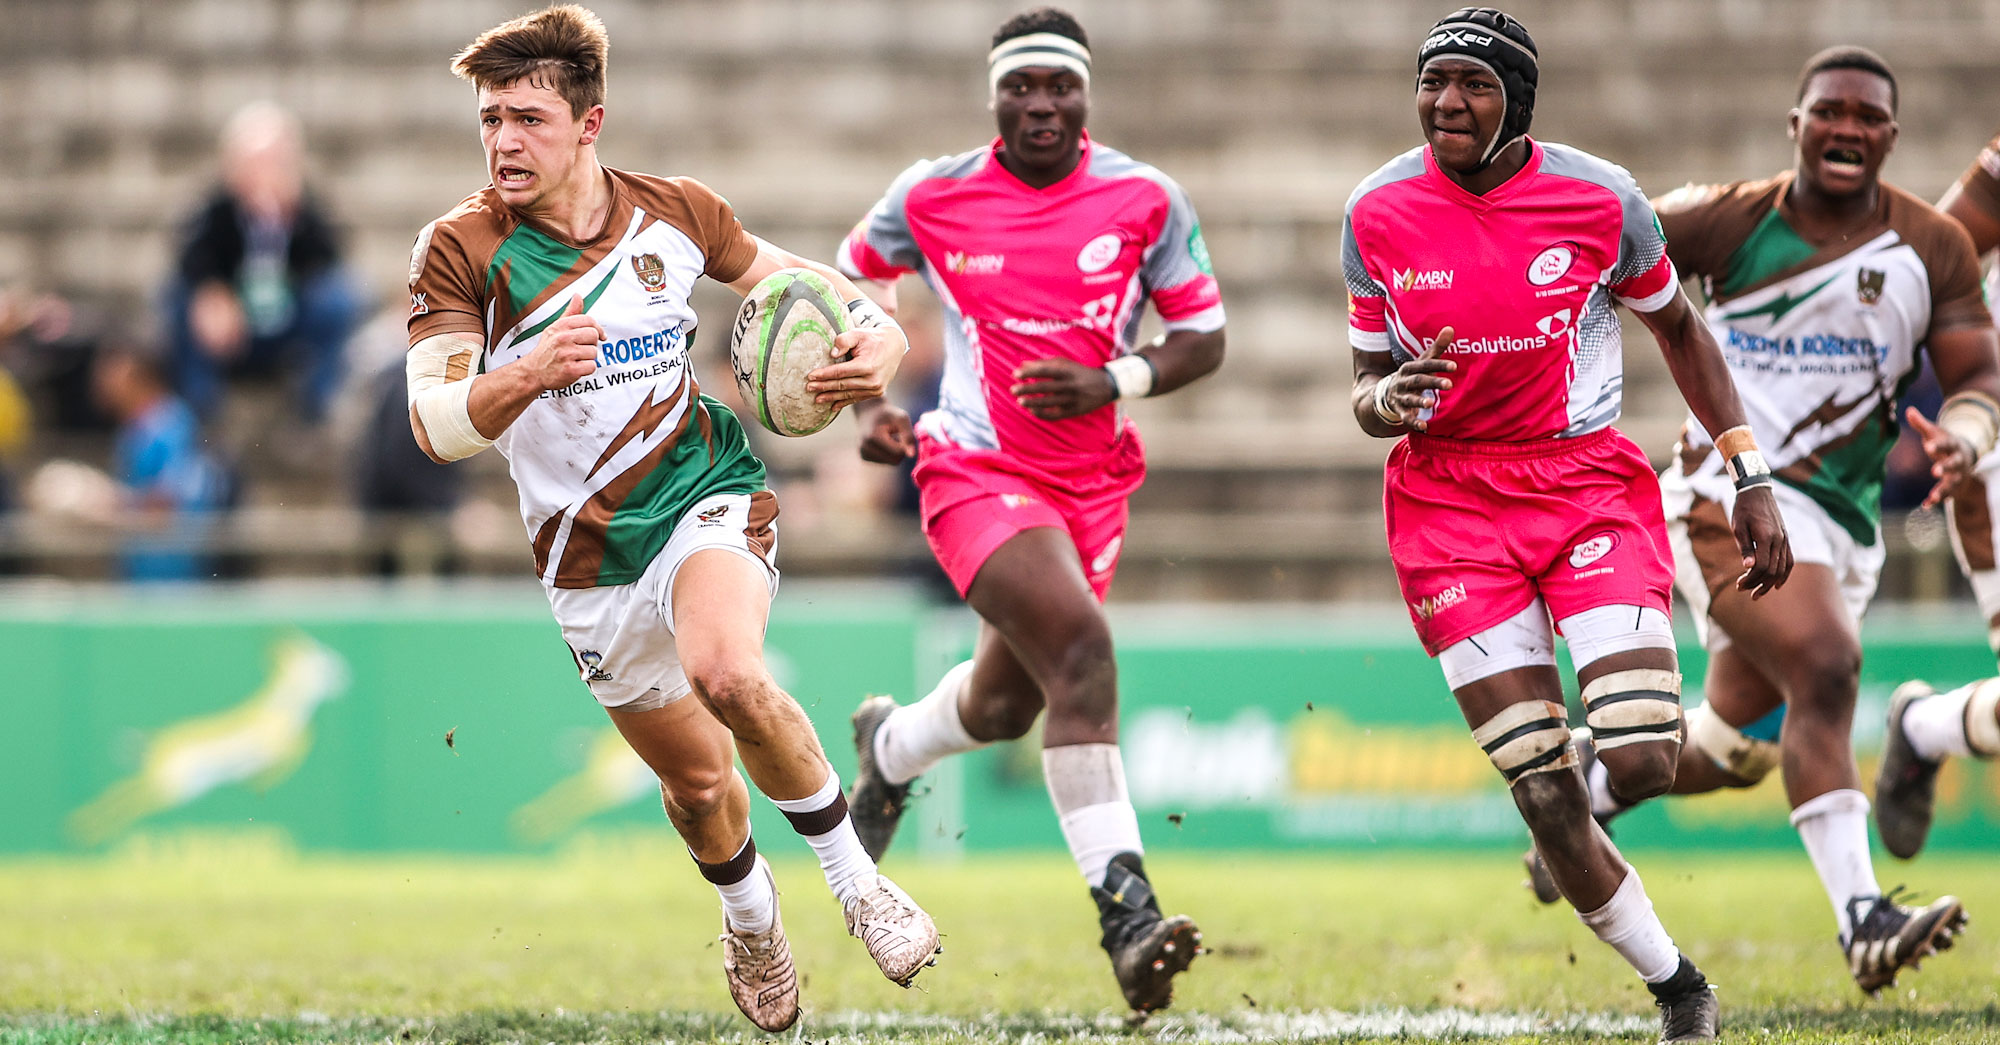 Border on the attack in their victory over the Pumas on the fourth day at the U18 Craven Week.